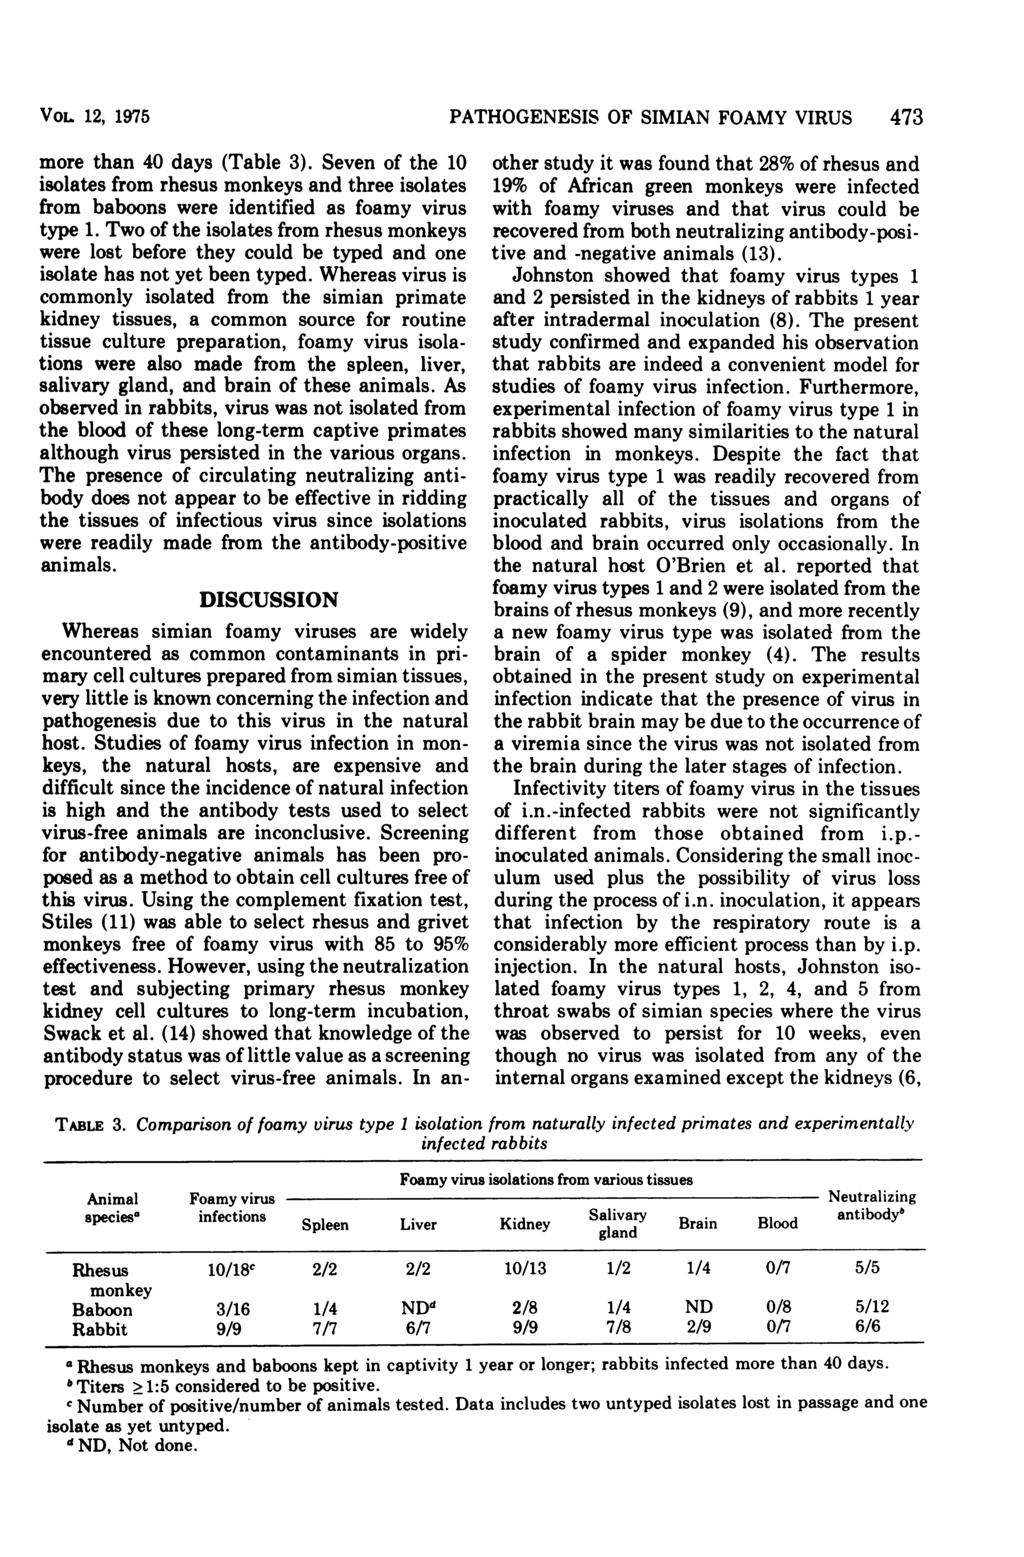 VOL 12, 1975 more than 40 days (Table 3). Seven of the 10 isolates from rhesus monkeys and three isolates from baboons were identified as foamy virus type 1.